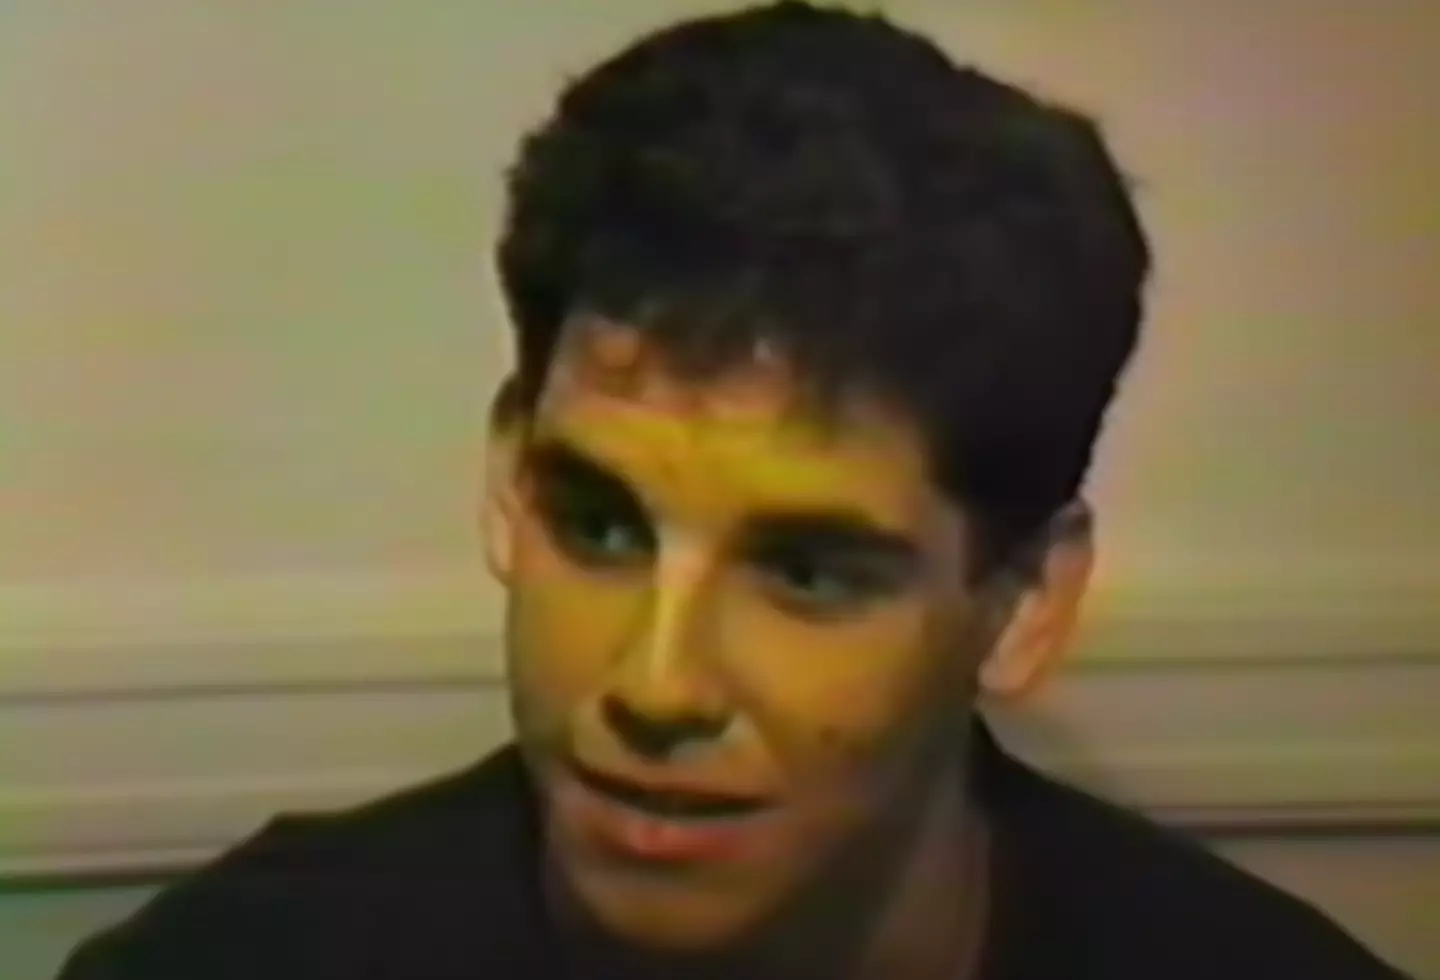 Ben Stiller auditioning for the role of Marty McFly.